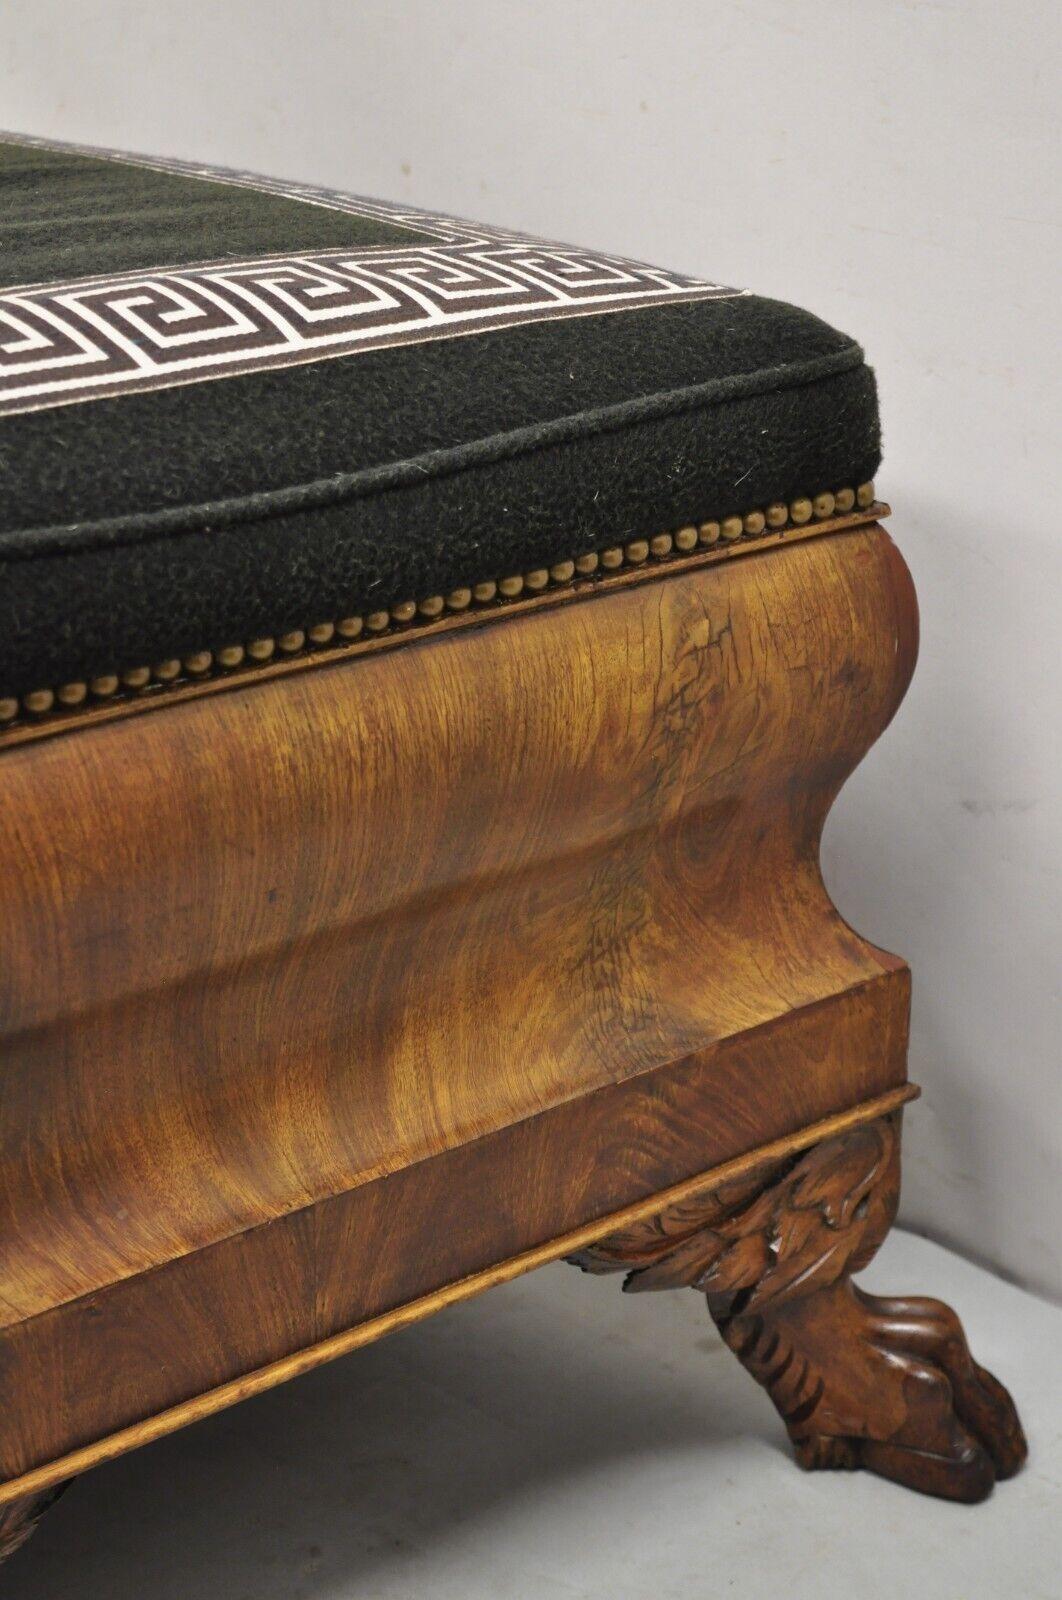 19th C. American Empire Carved Winged Paw Foot Mahogany Large Box Stool Ottoman For Sale 4